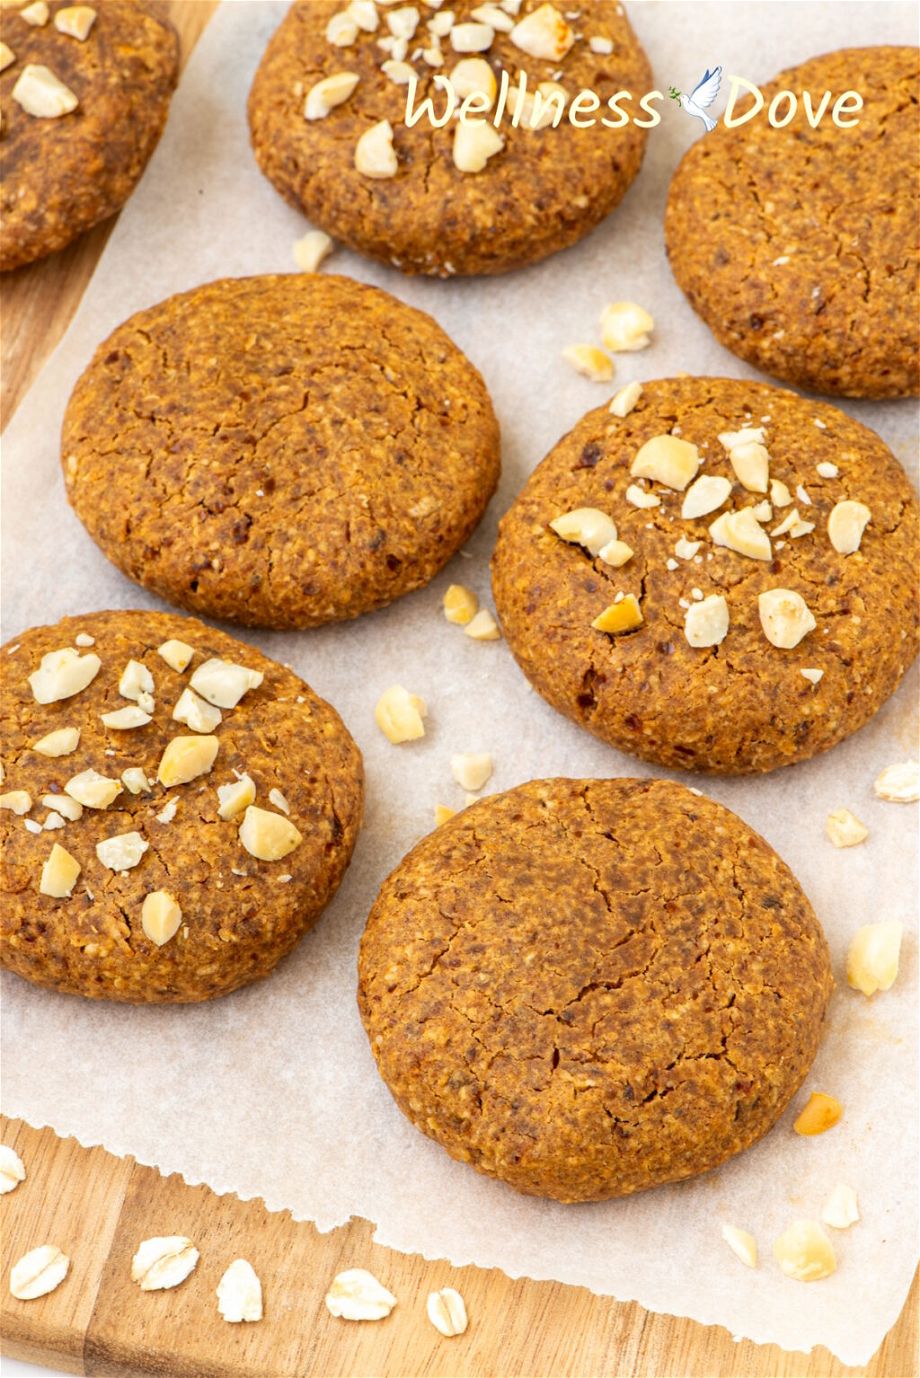 the Oatmeal Peanut Butter Vegan Cookies on a chopping board